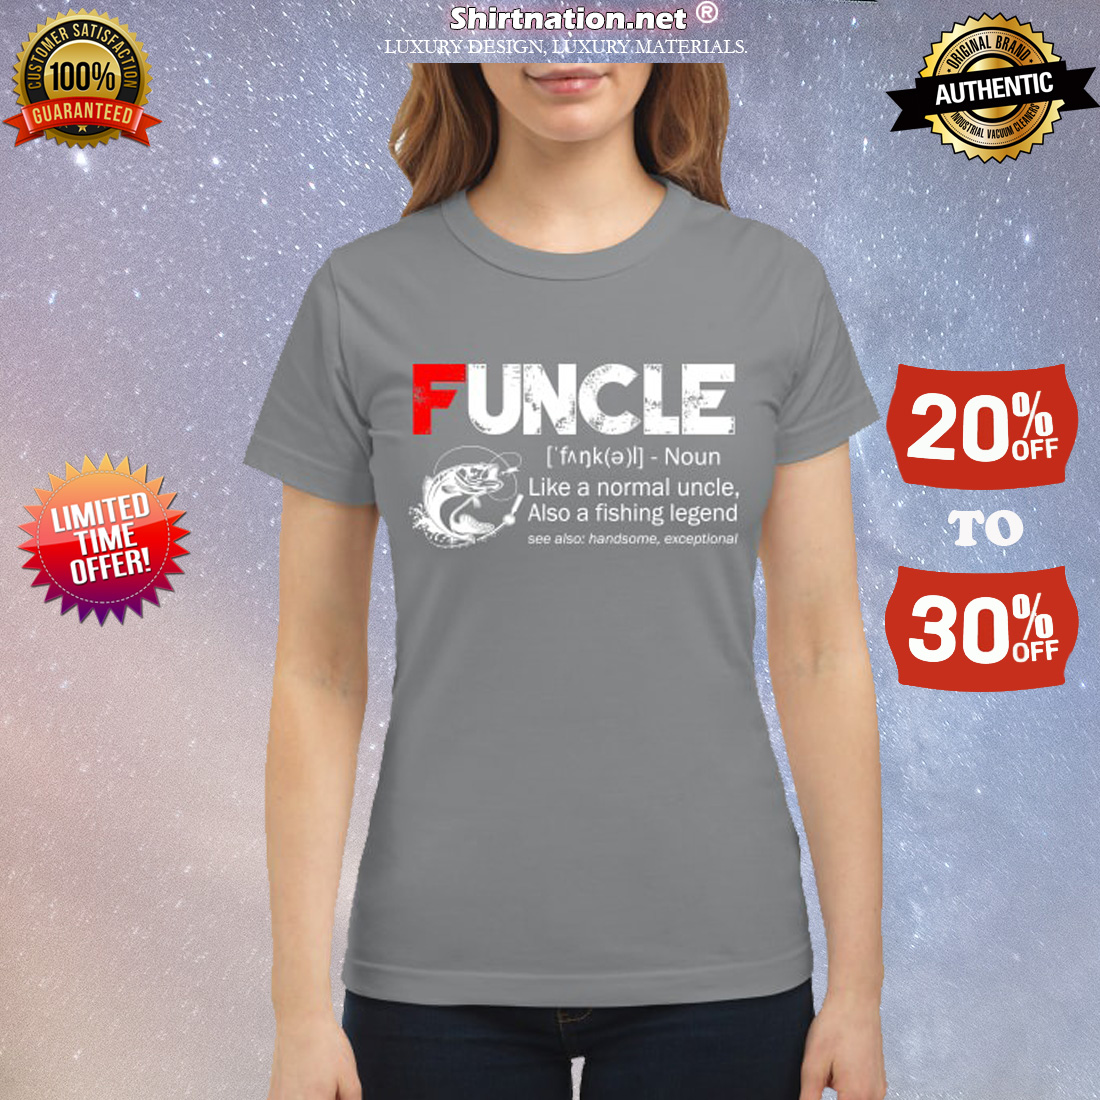 Funcle like a normal uncle also a fishing legend classic shirt